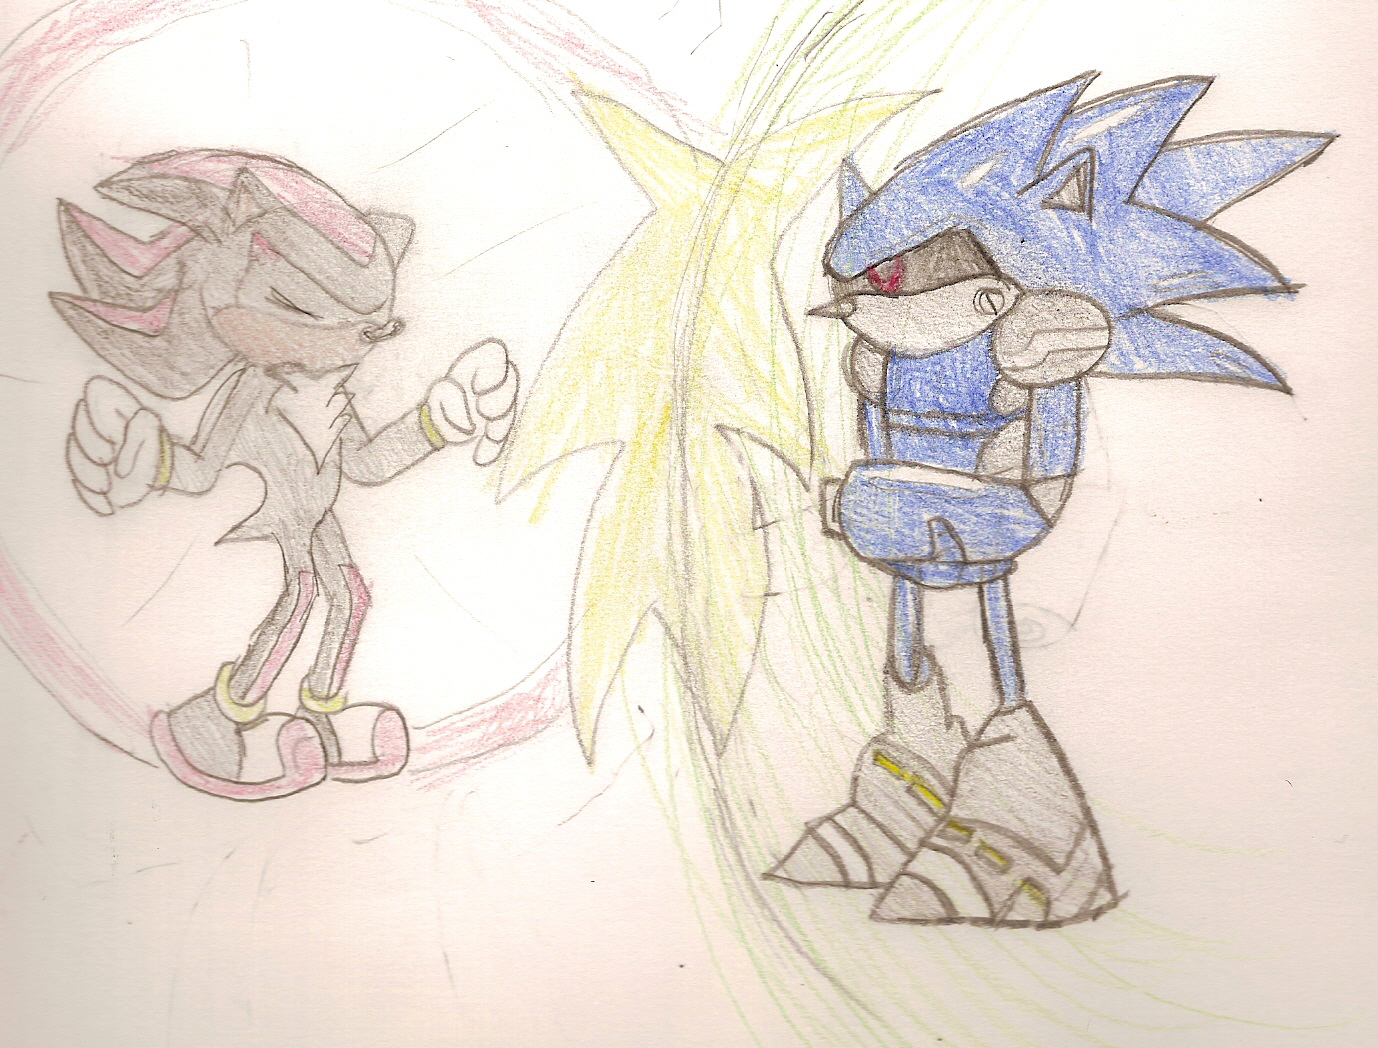 Request for megamanxz by Shadowthe_hedgehog